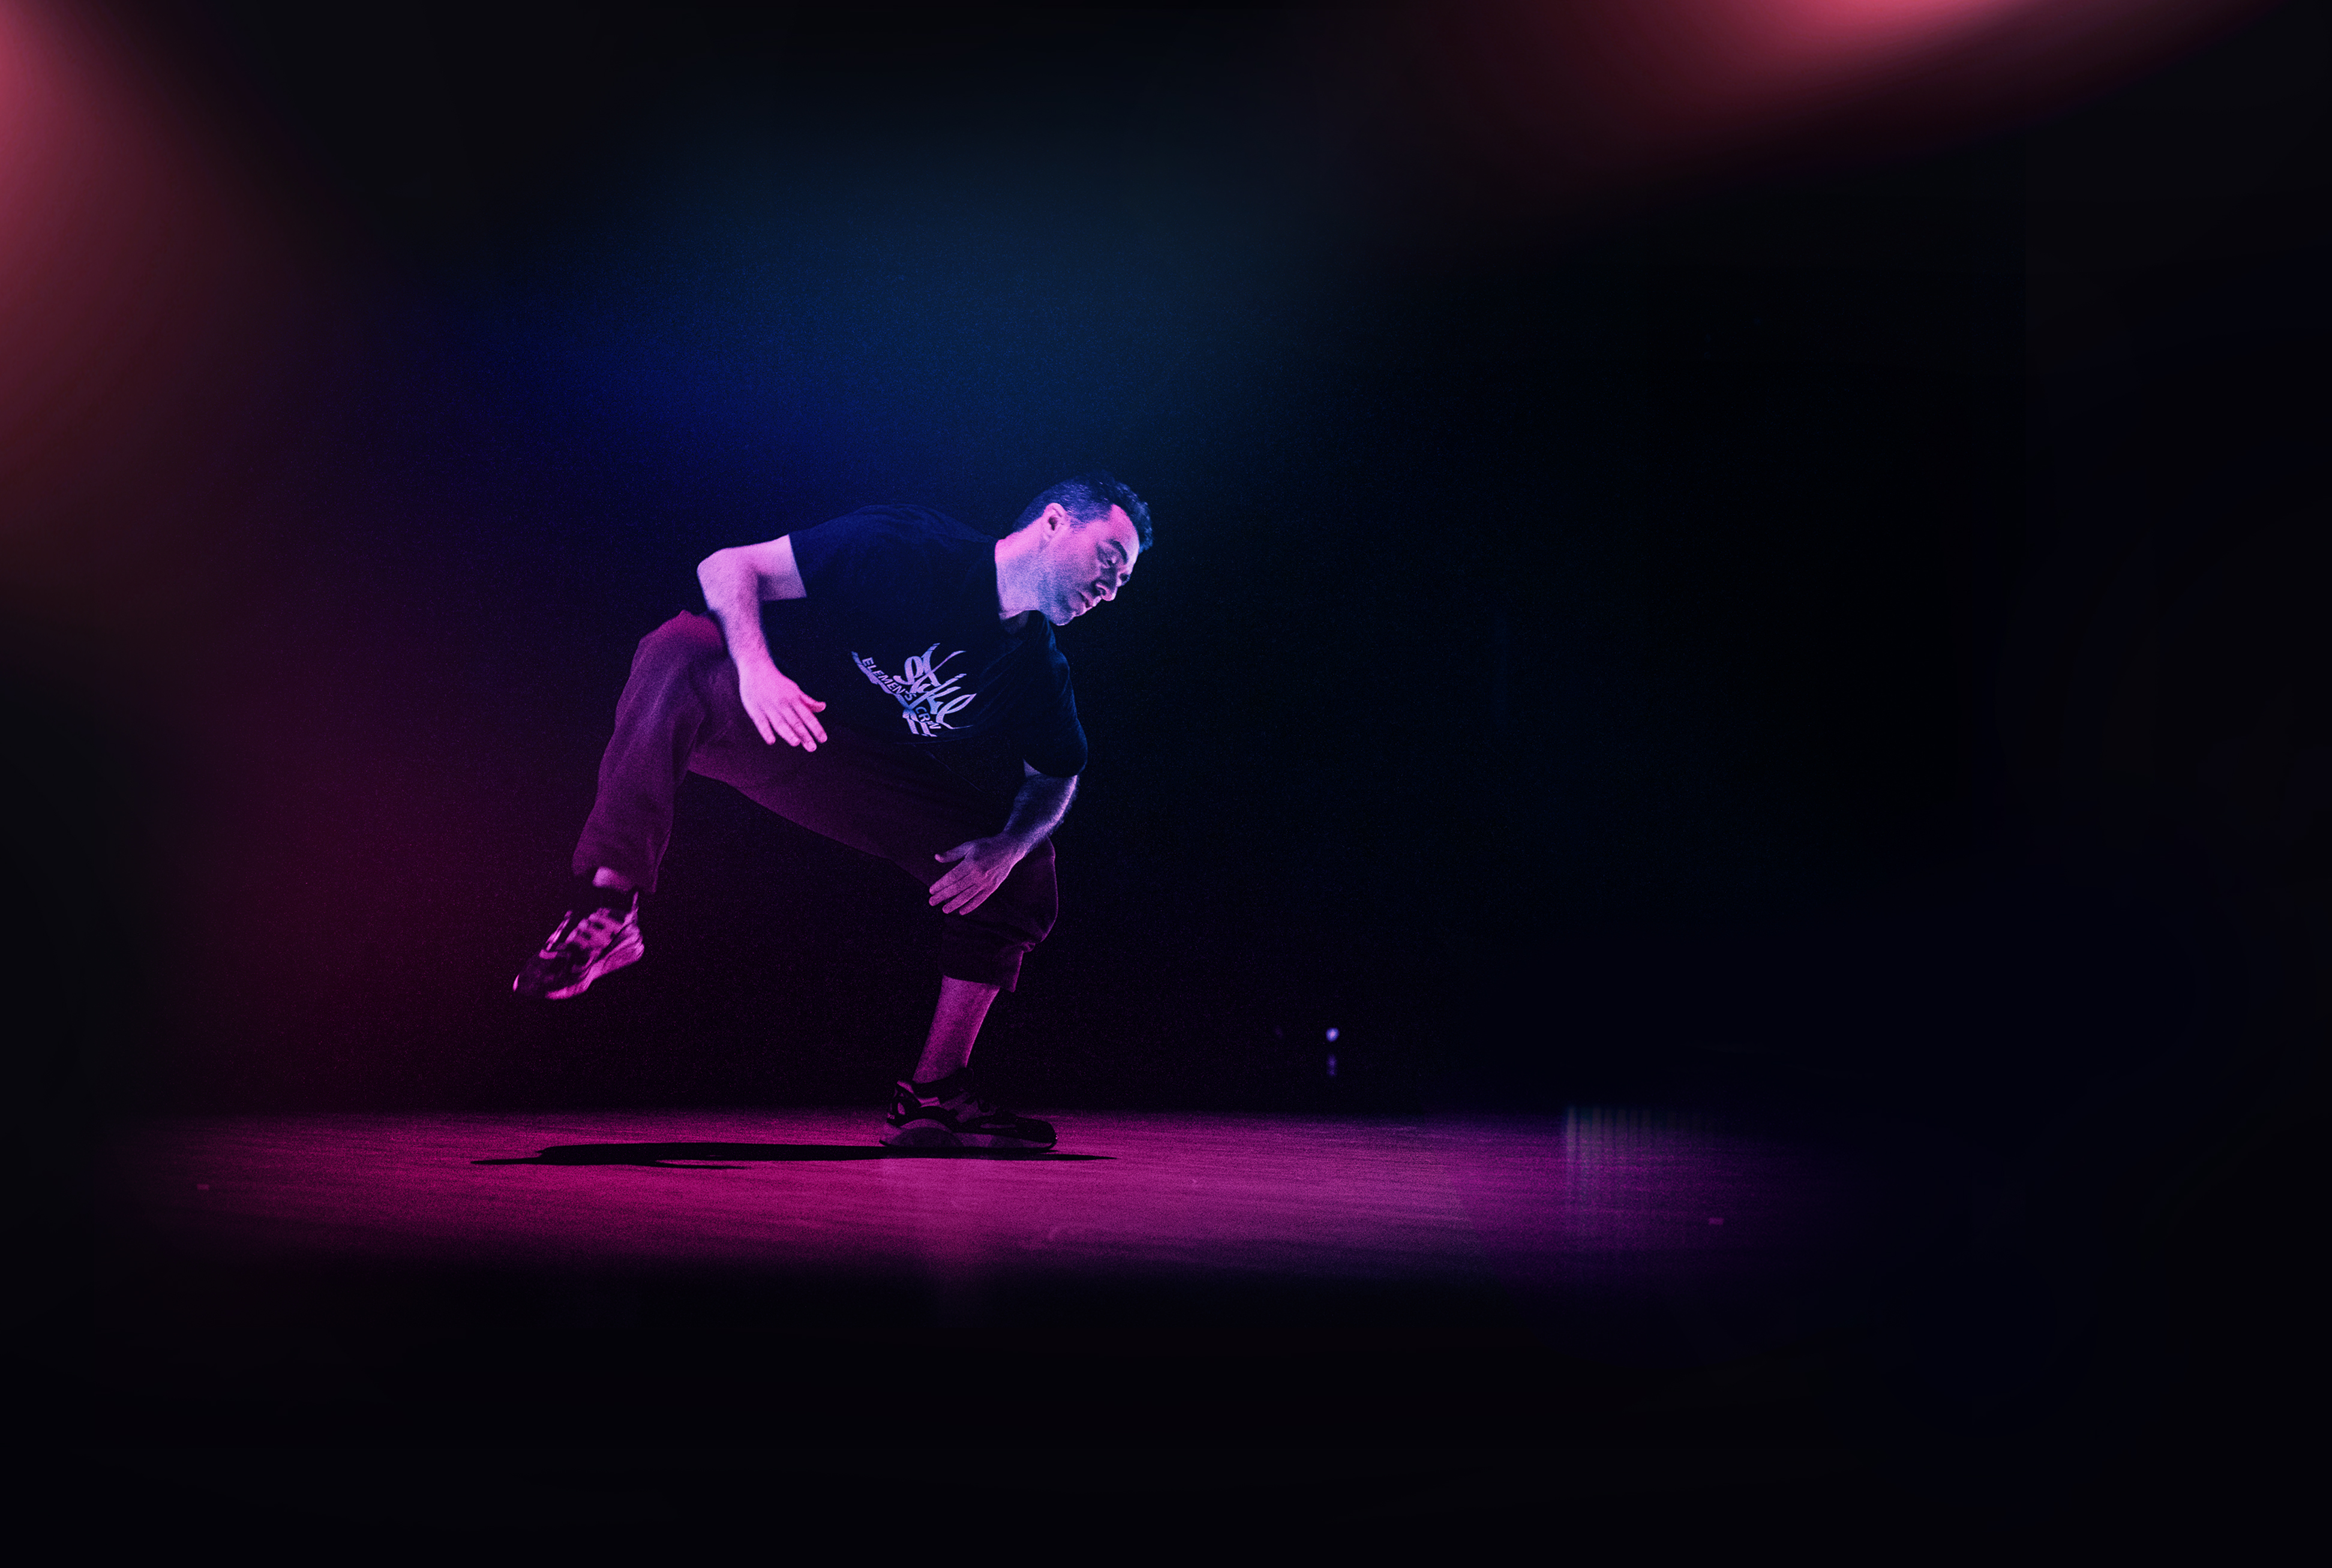  A male dancer is pictured mid-move, in a deep squat with his right leg lifted, so he is balanced on his left leg. He looks down and to the left. The stage area is dark, with a pink spotlight on him. Photo by Hoi Phan Do, courtesy of the Department of Dance.